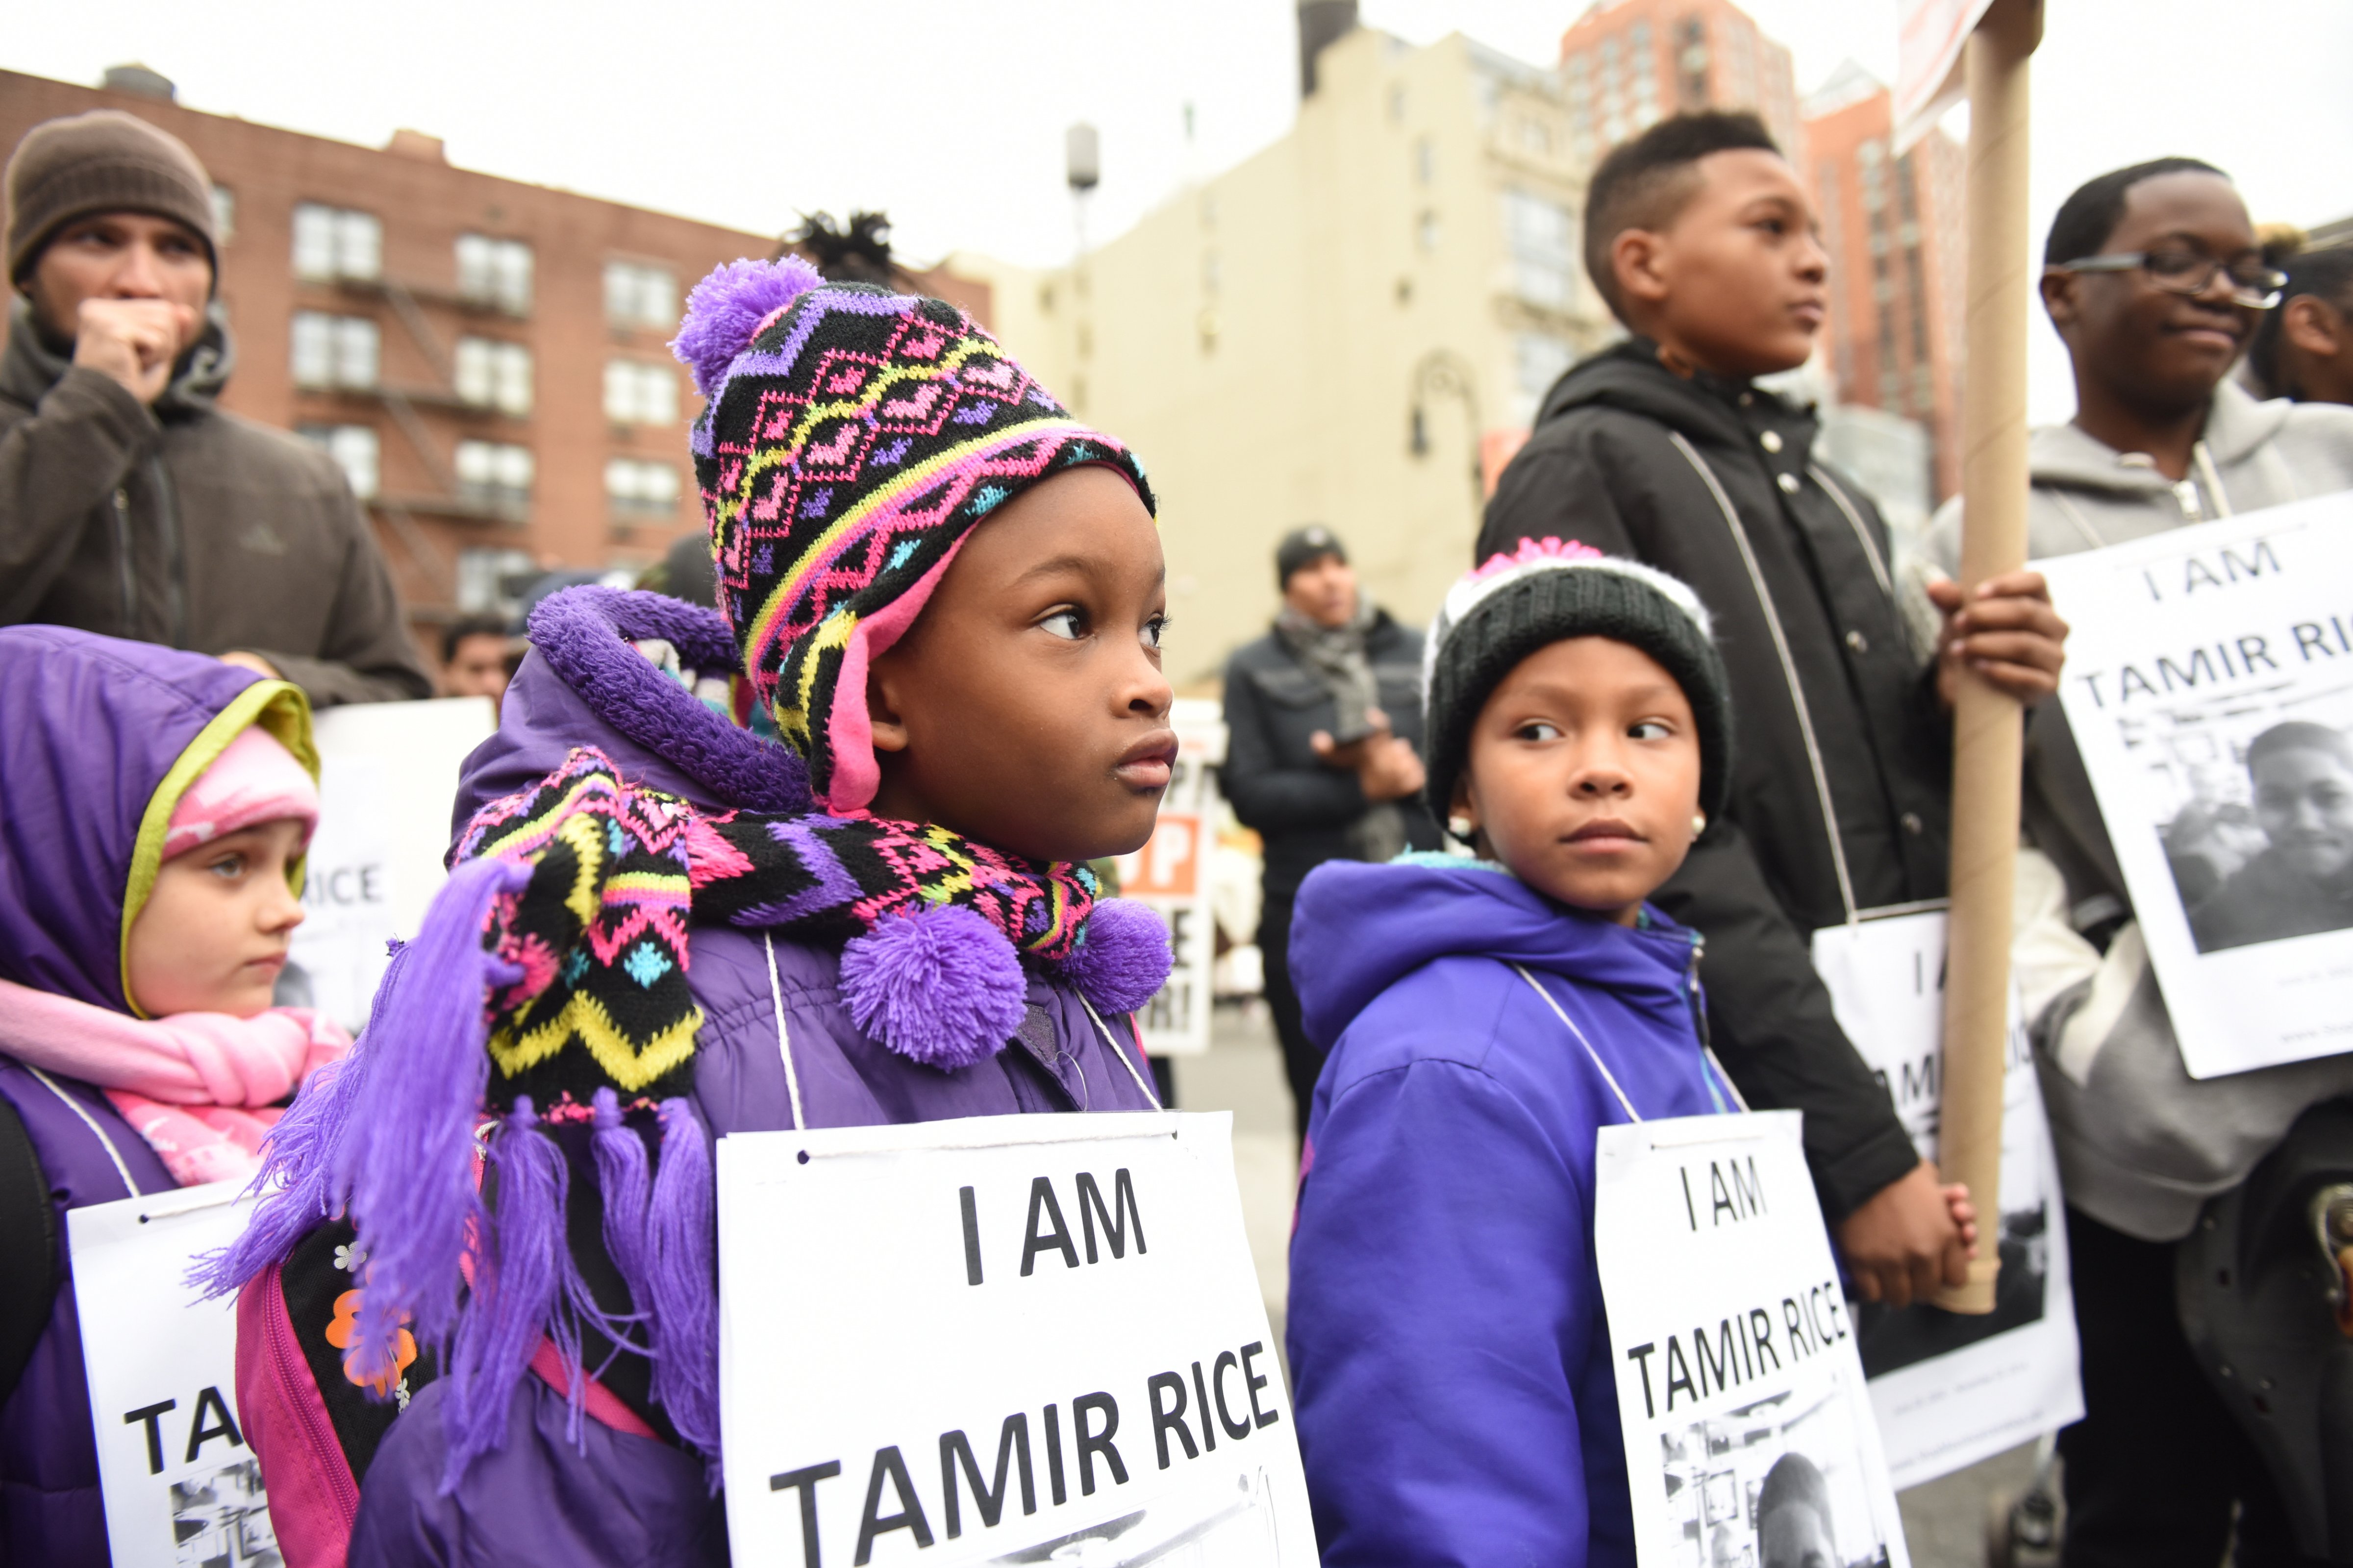 Children wear <i>I Am Tamir Rice</i> signs at a Stop Mass Incarcerations Network sponsored march demanding accountability on the one year anniversary of Tamir Rice's death at the hands of the Cleveland police in New York City on Nov. 22, 2015. (Andy Katz—Pacific Press/LightRocket/ Getty Images)